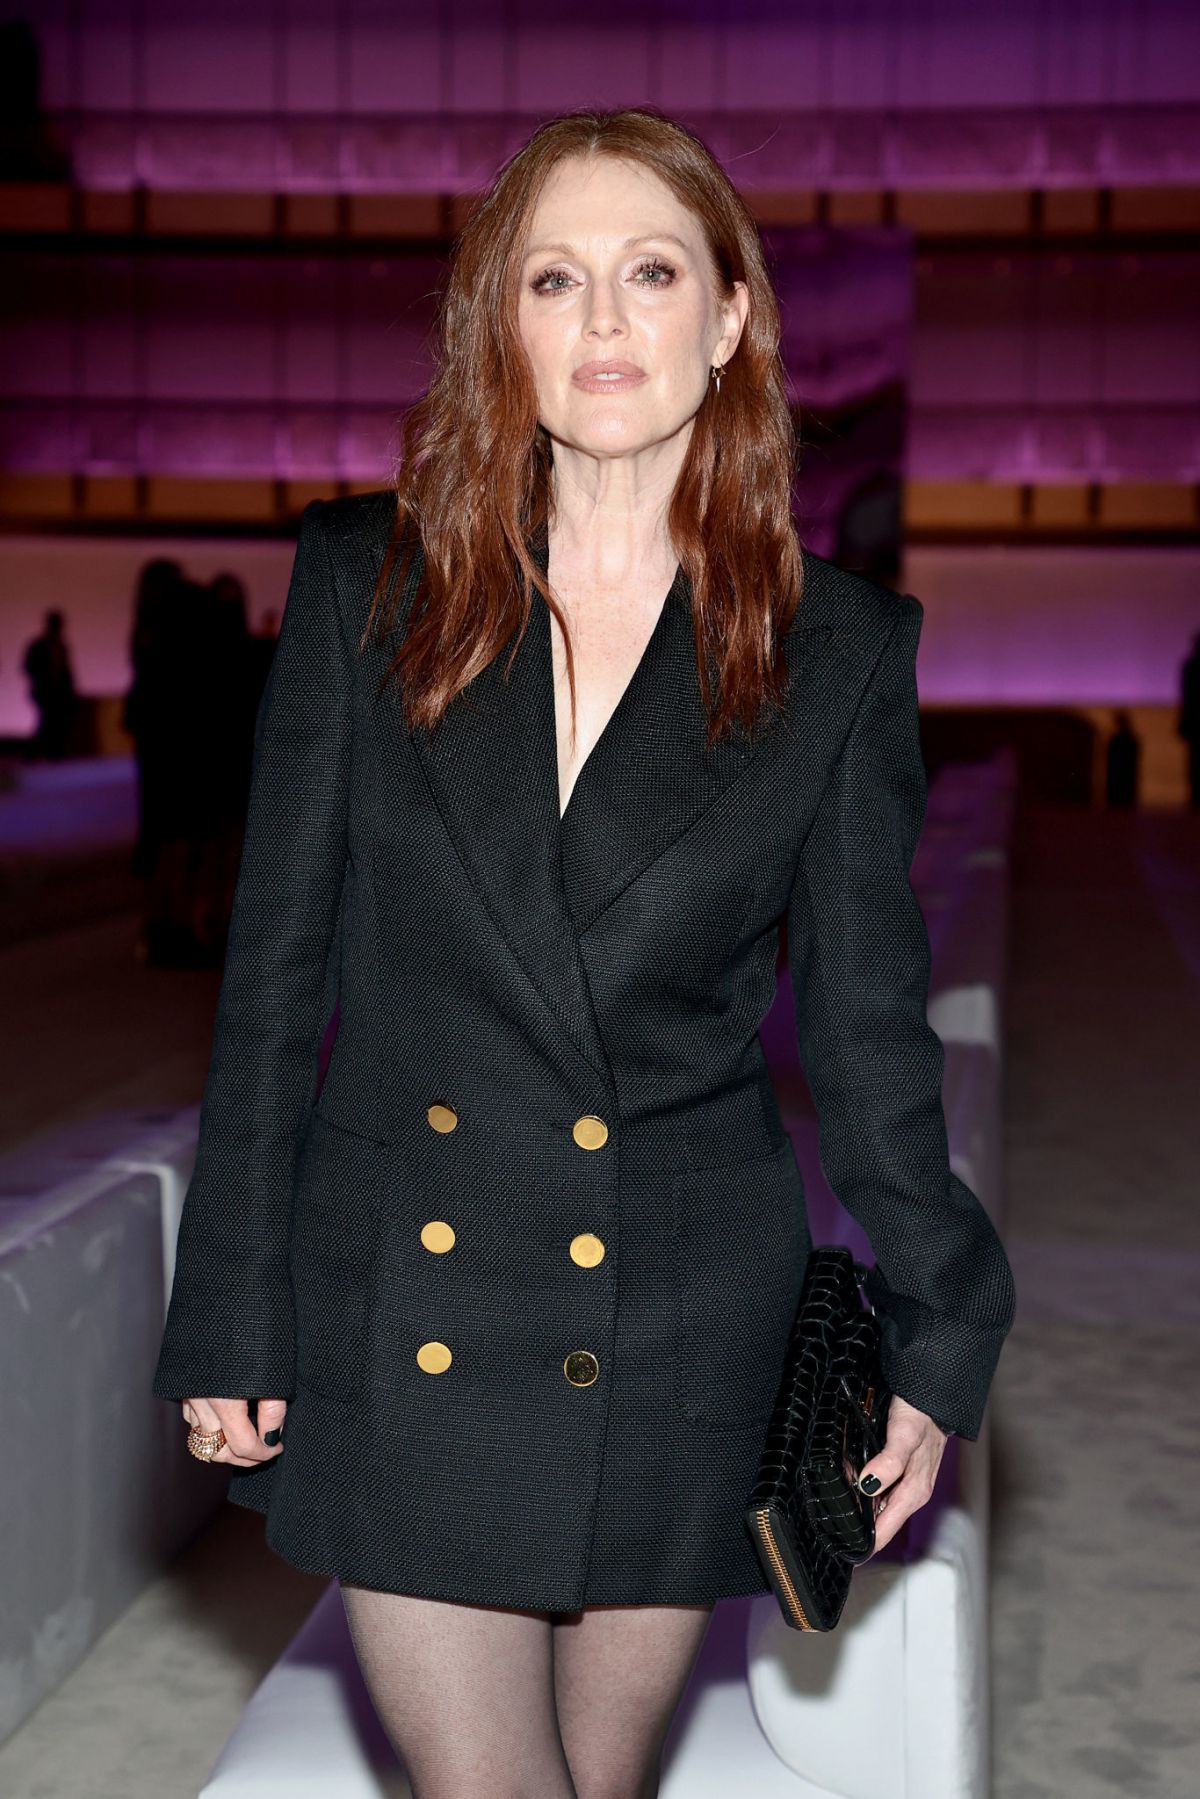 JULIANNE MOORE at Tom Ford Fashion Show in New York 09/12/2021 – HawtCelebs